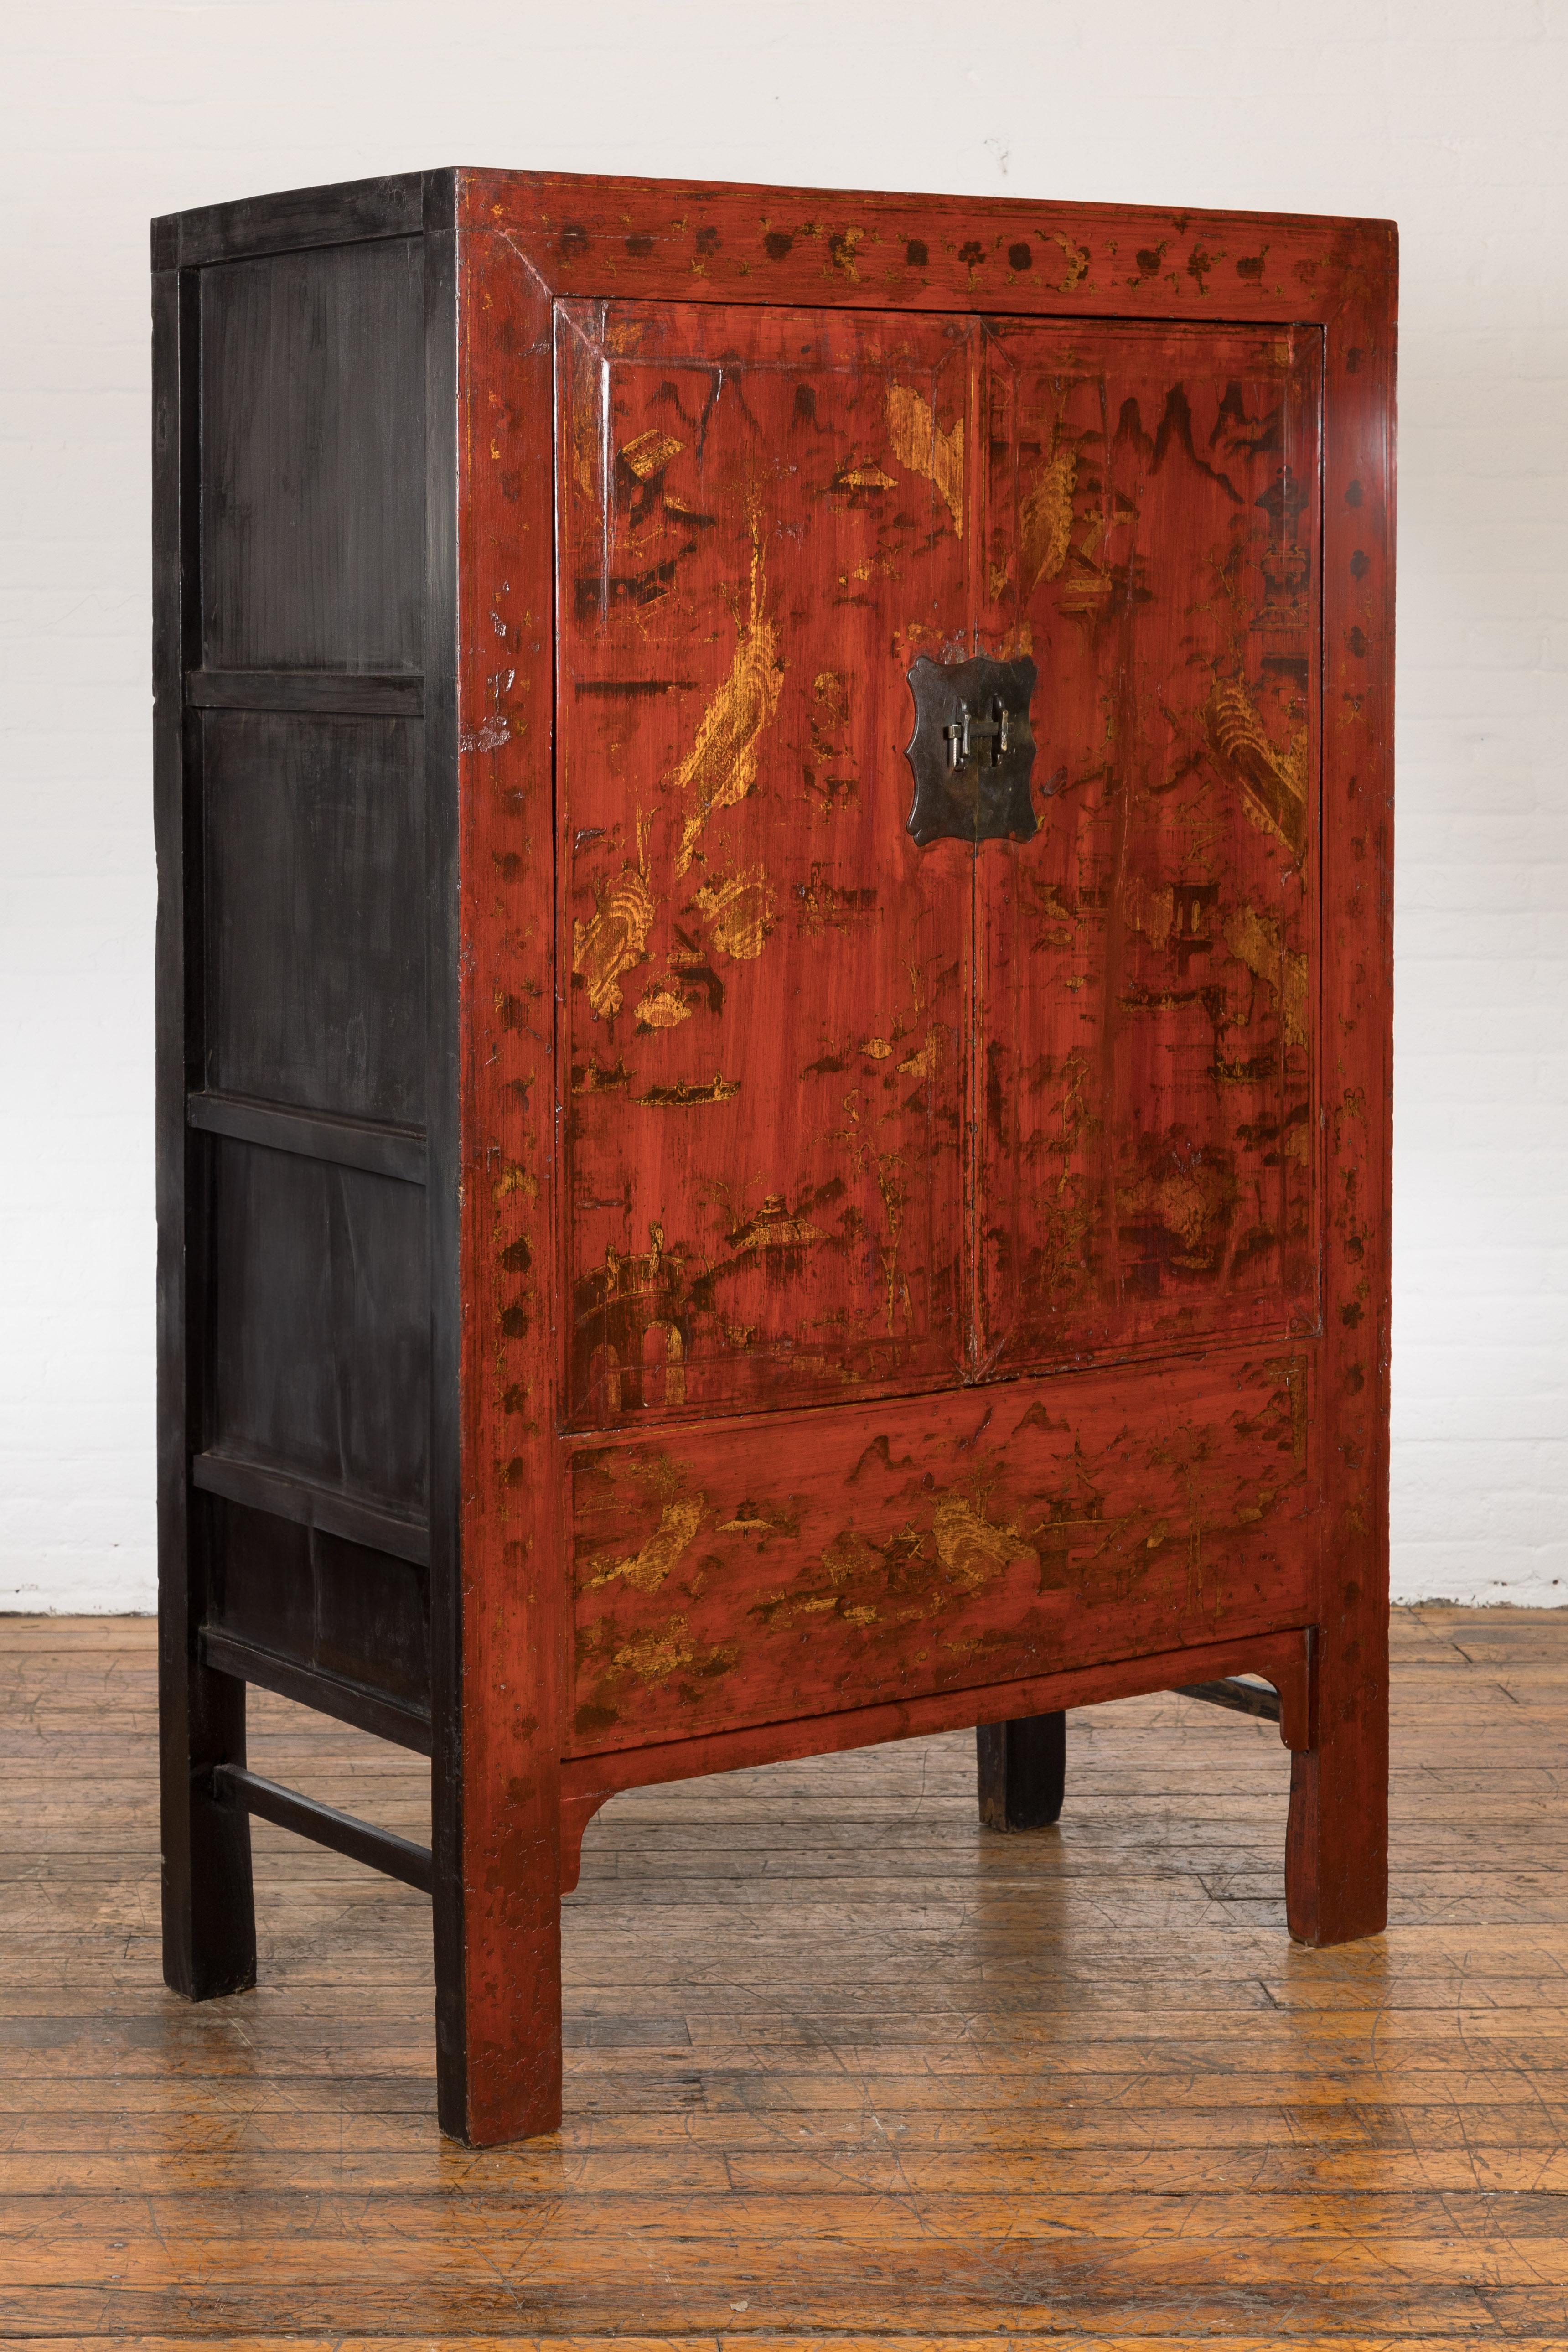 Large Red Antique Cabinet with Gold Painted Scenes 7